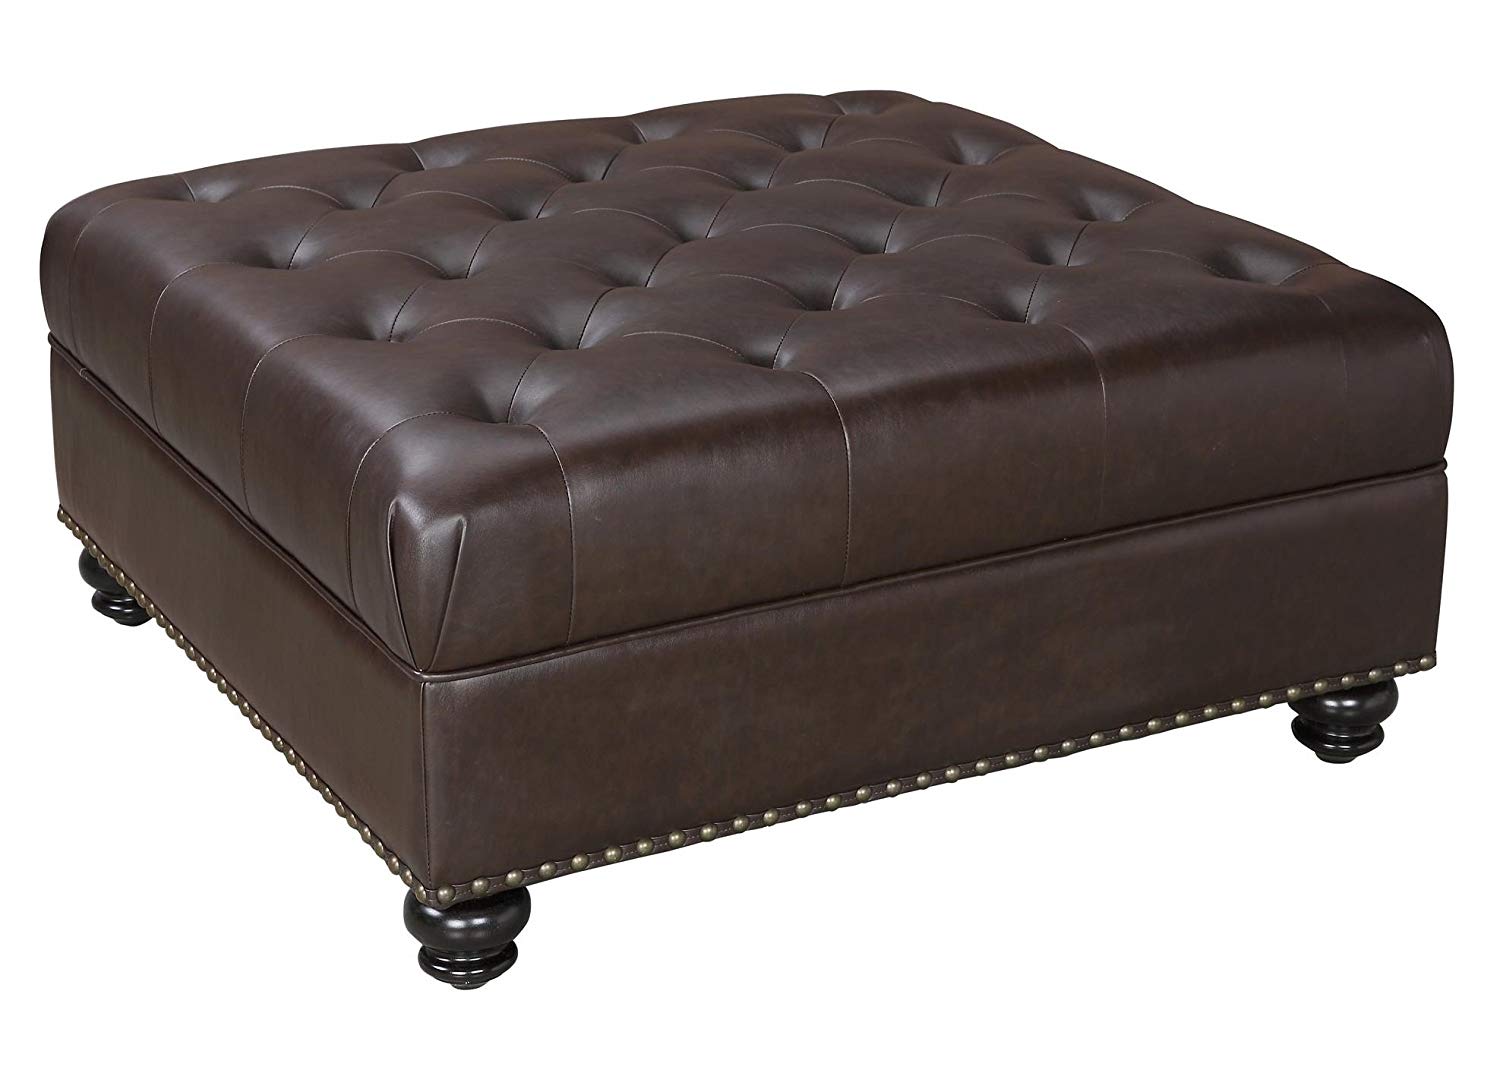 Dorel Living Hastings Brown Faux Leather Ottoman